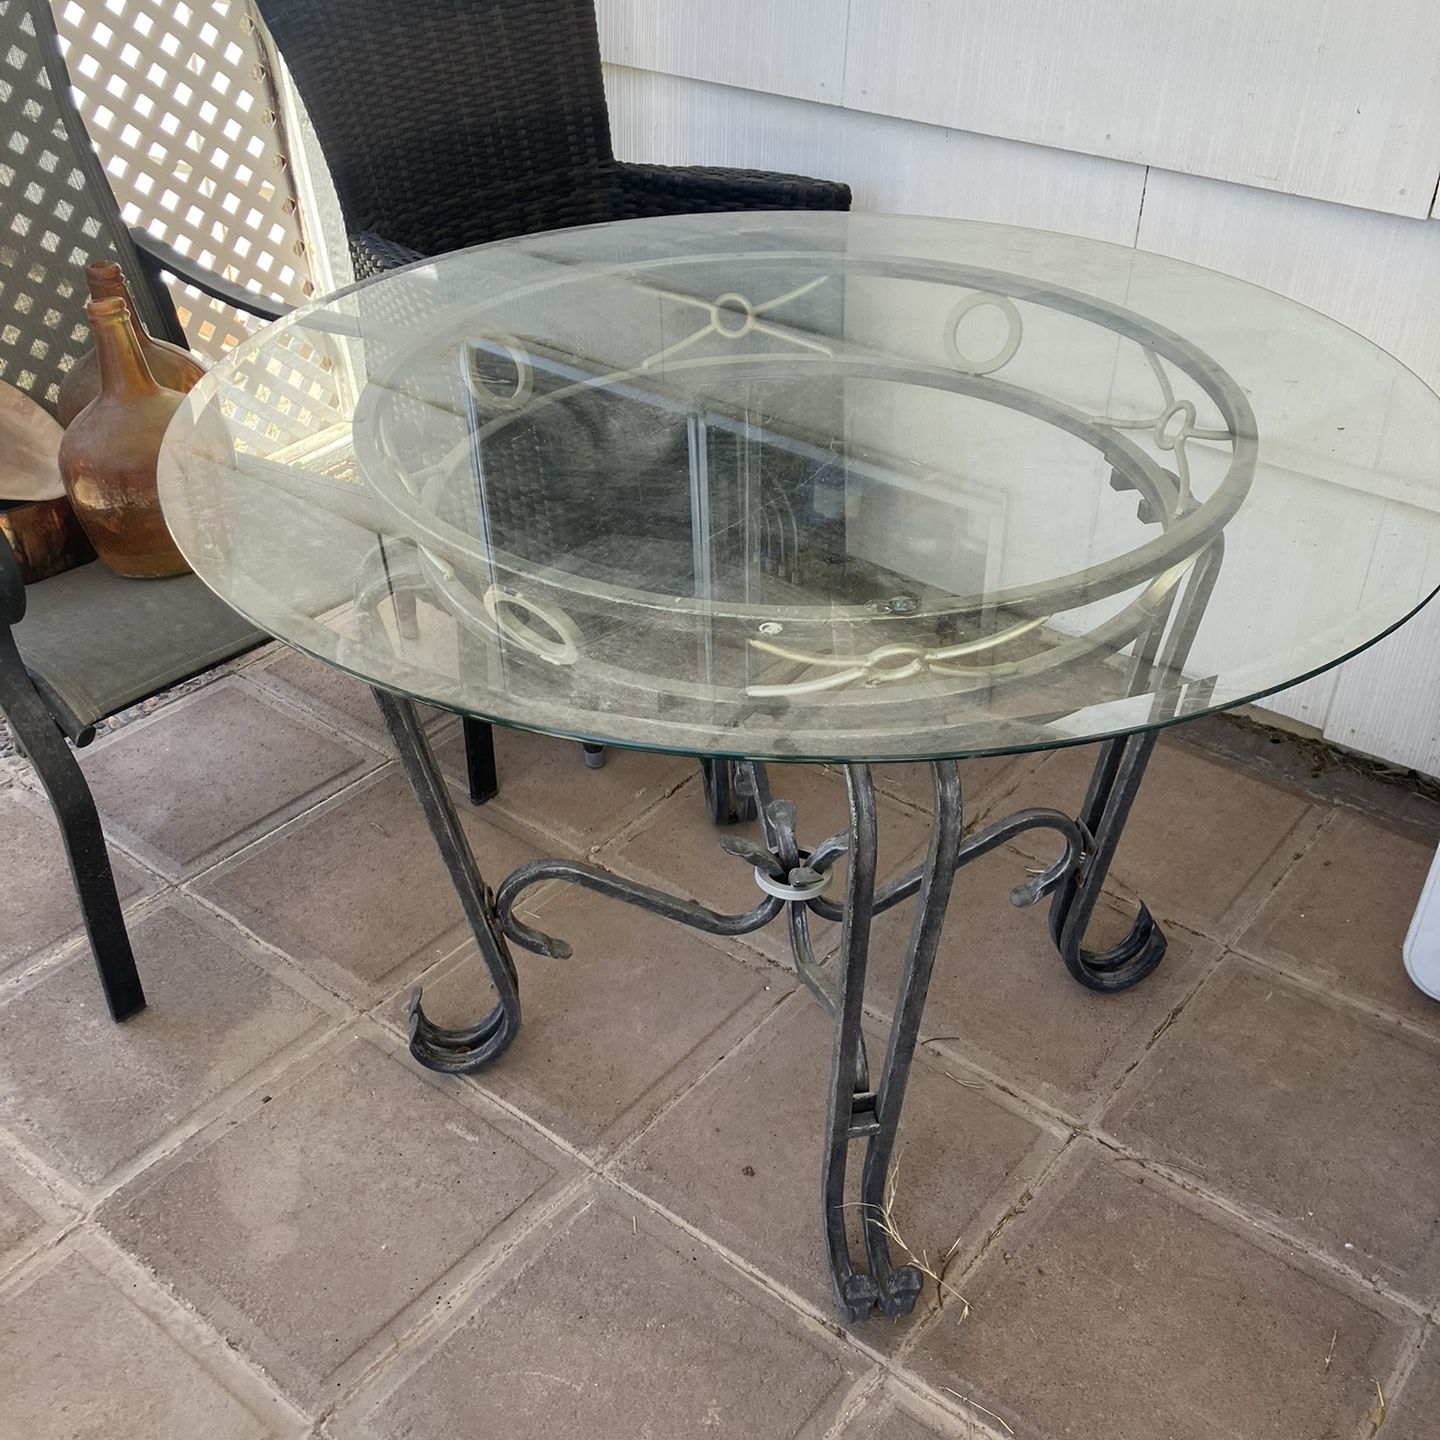 Patio Table (No Chairs)